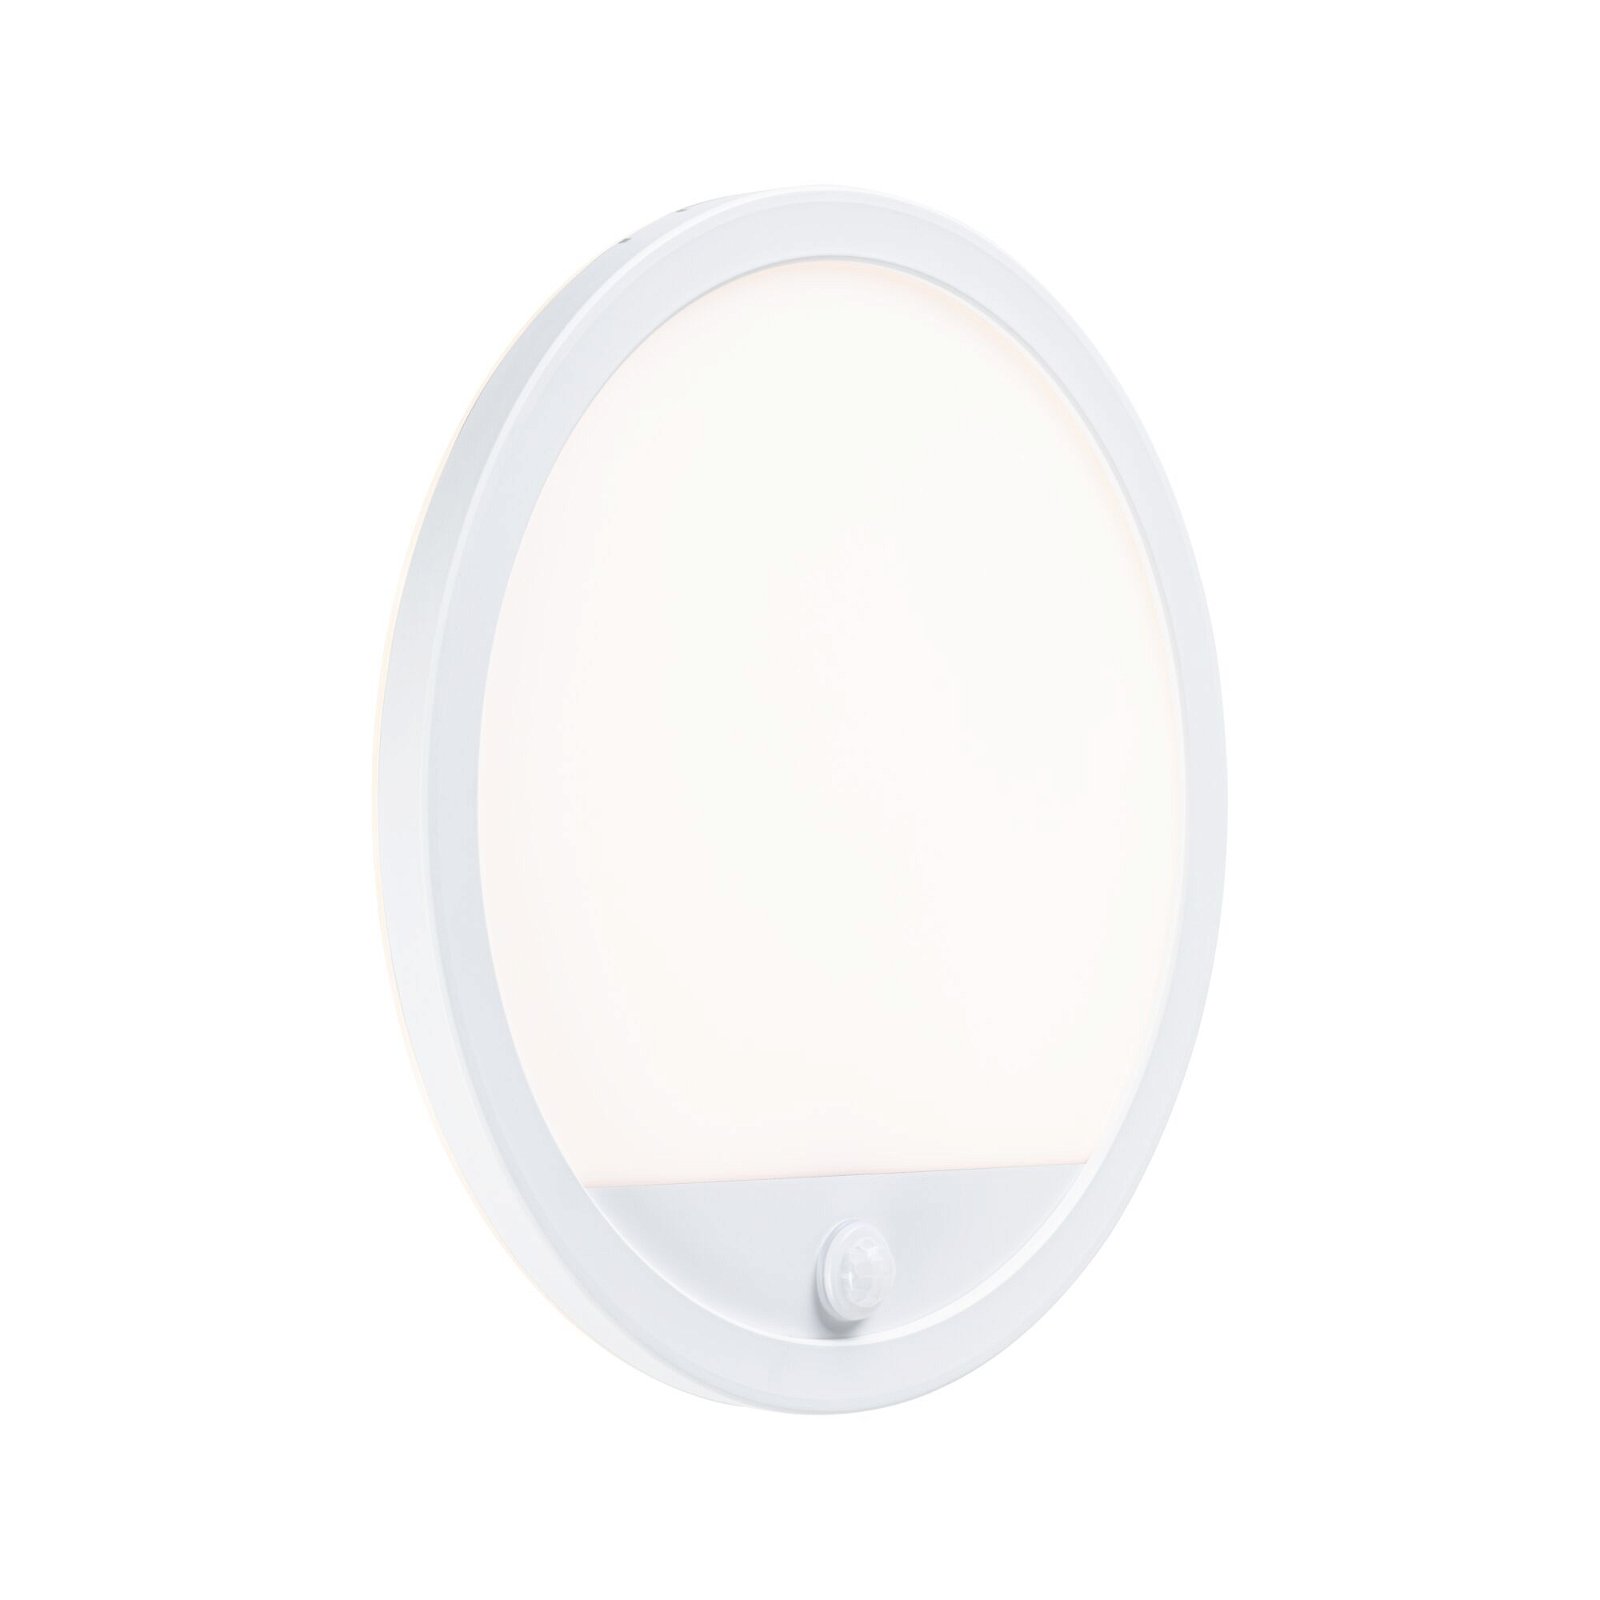 LED Exterior panel Lamina Backlight Motion detector insect friendly IP44 round 280mm Tunable Warm 14W 1150lm 230V White Plastic